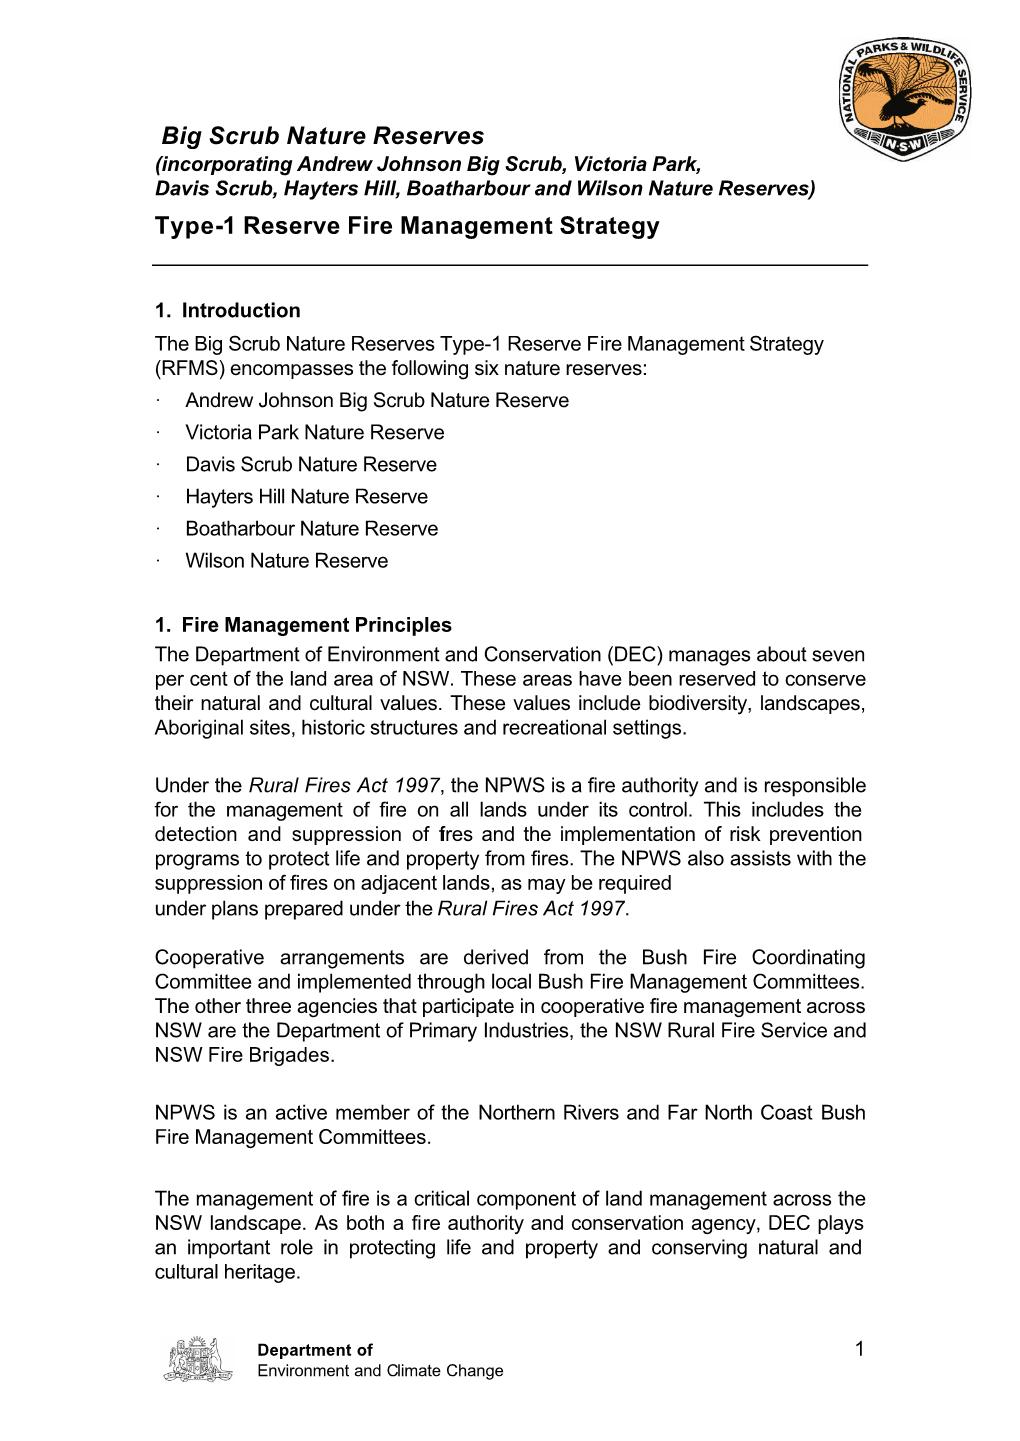 Big Scrub Nature Reserves Fire Management Strategydownload